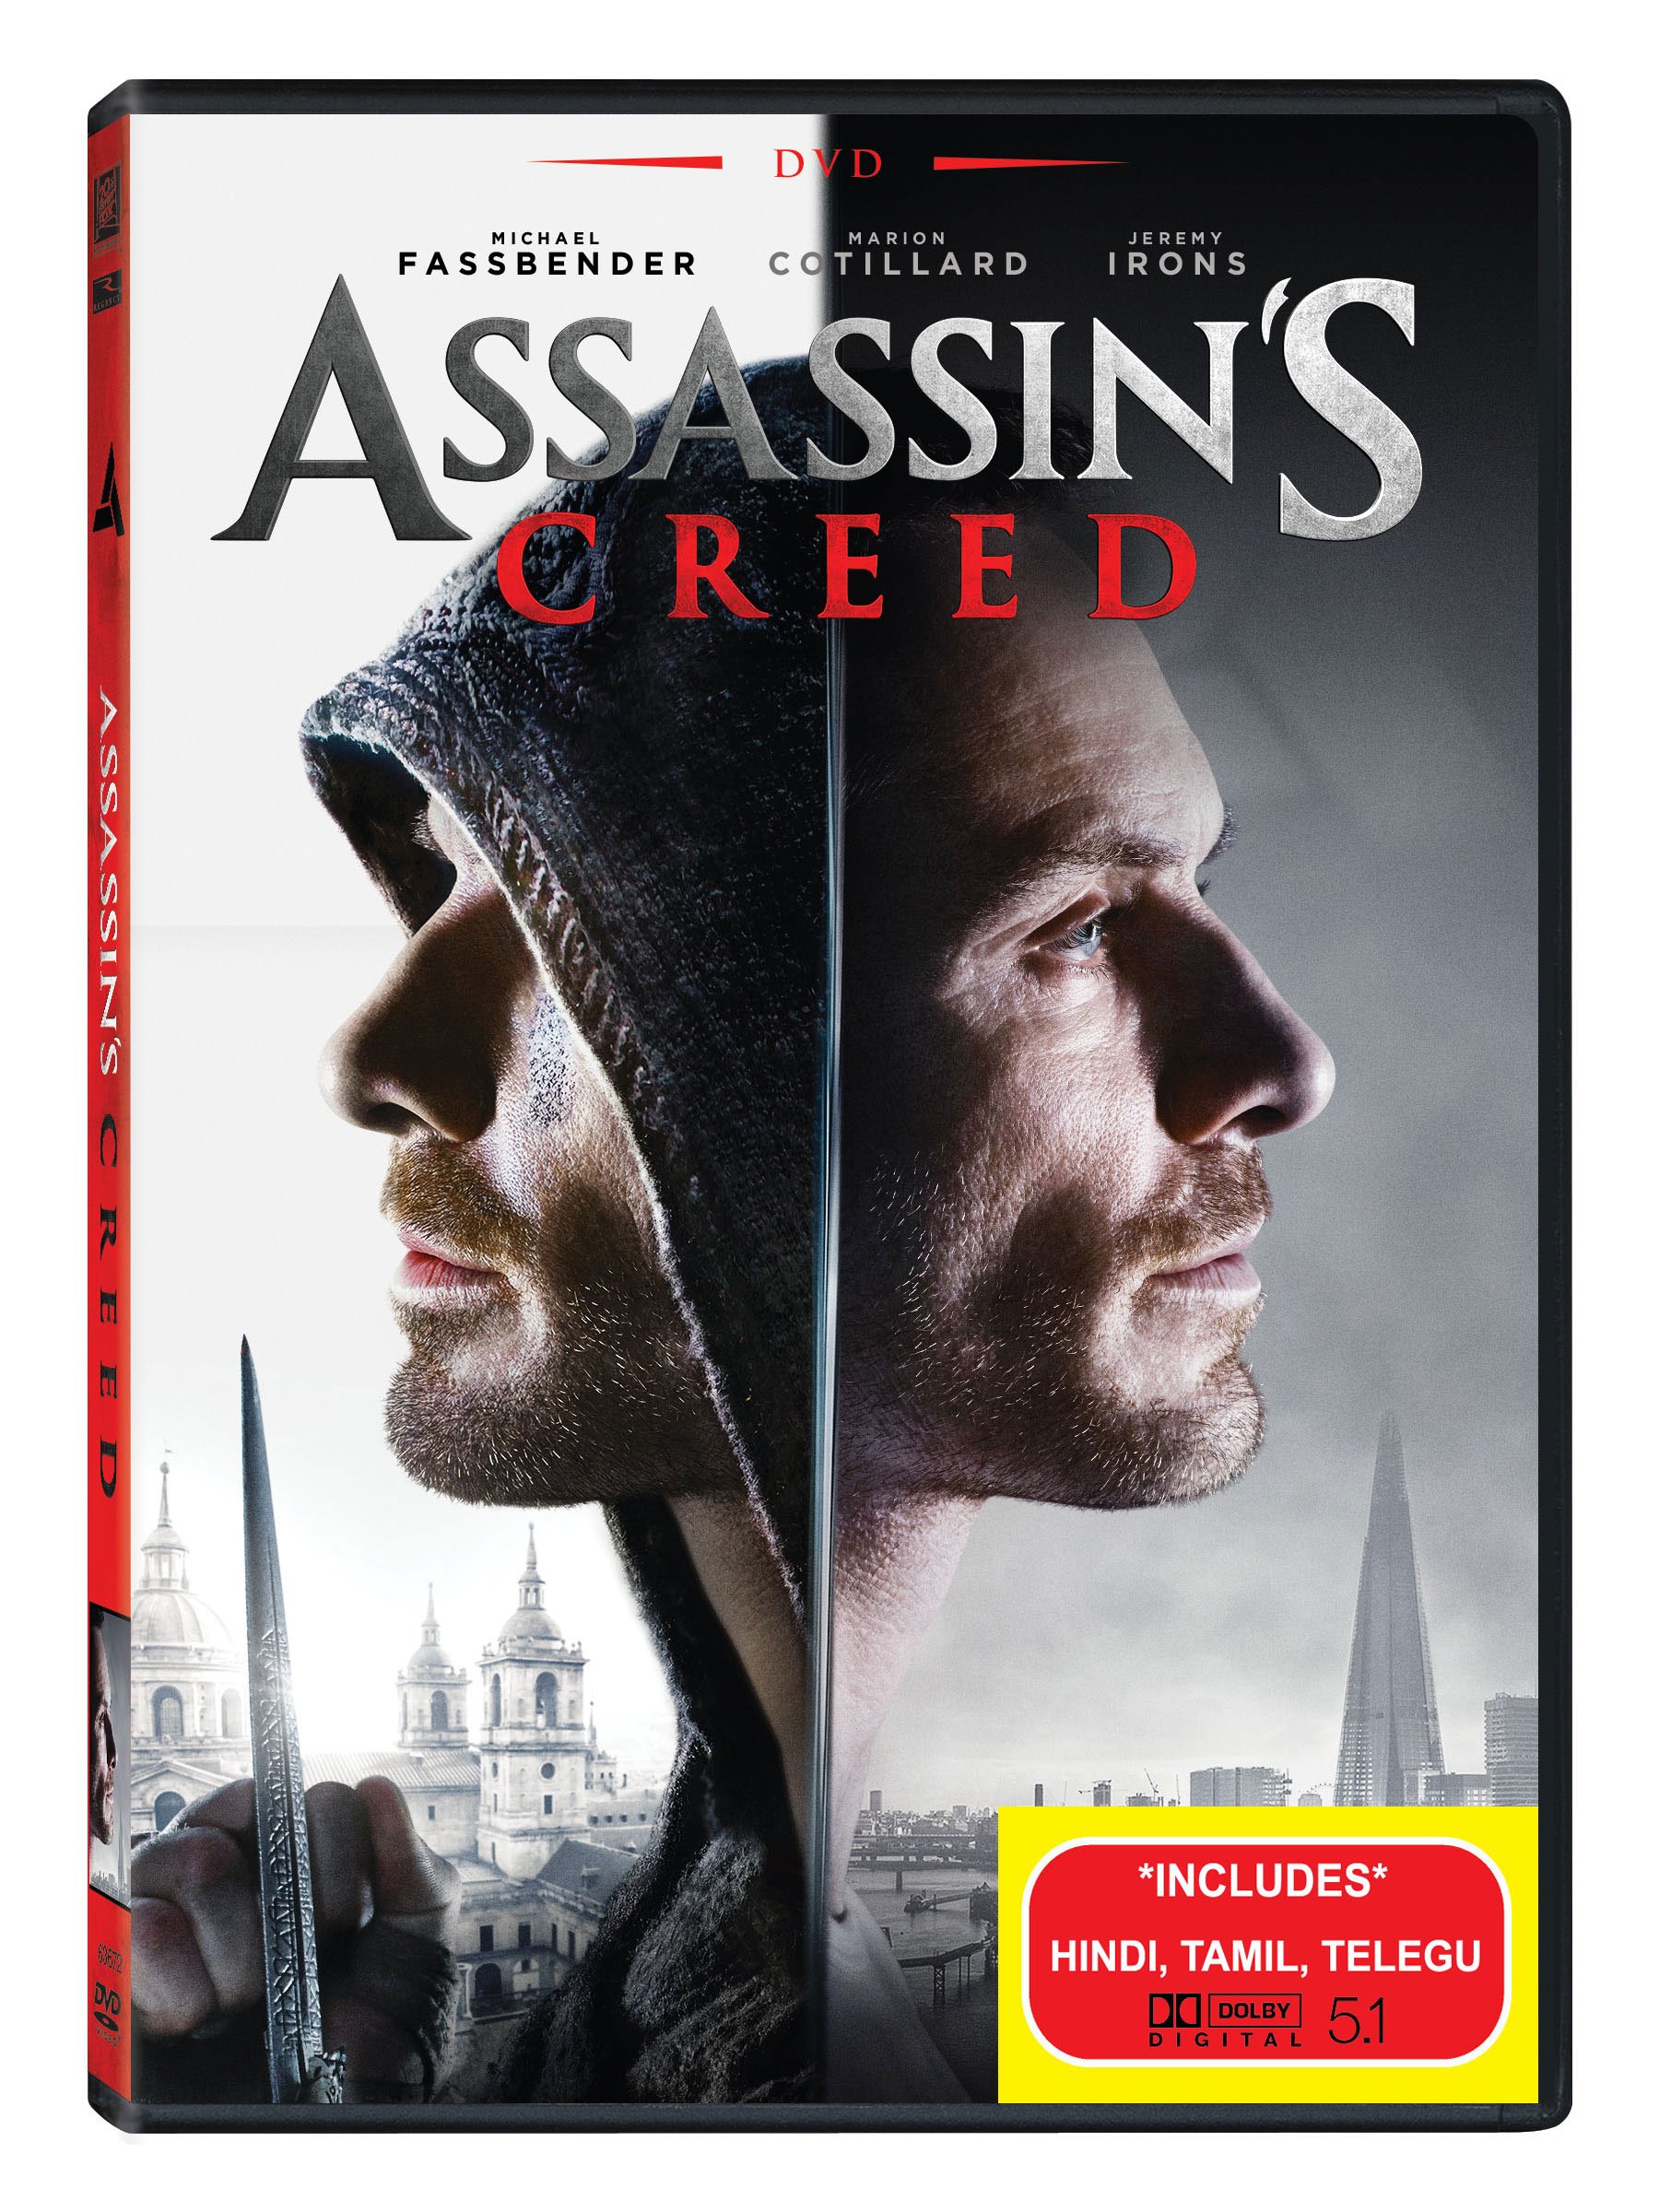 assassins-creed-dvd-movie-purchase-or-watch-online